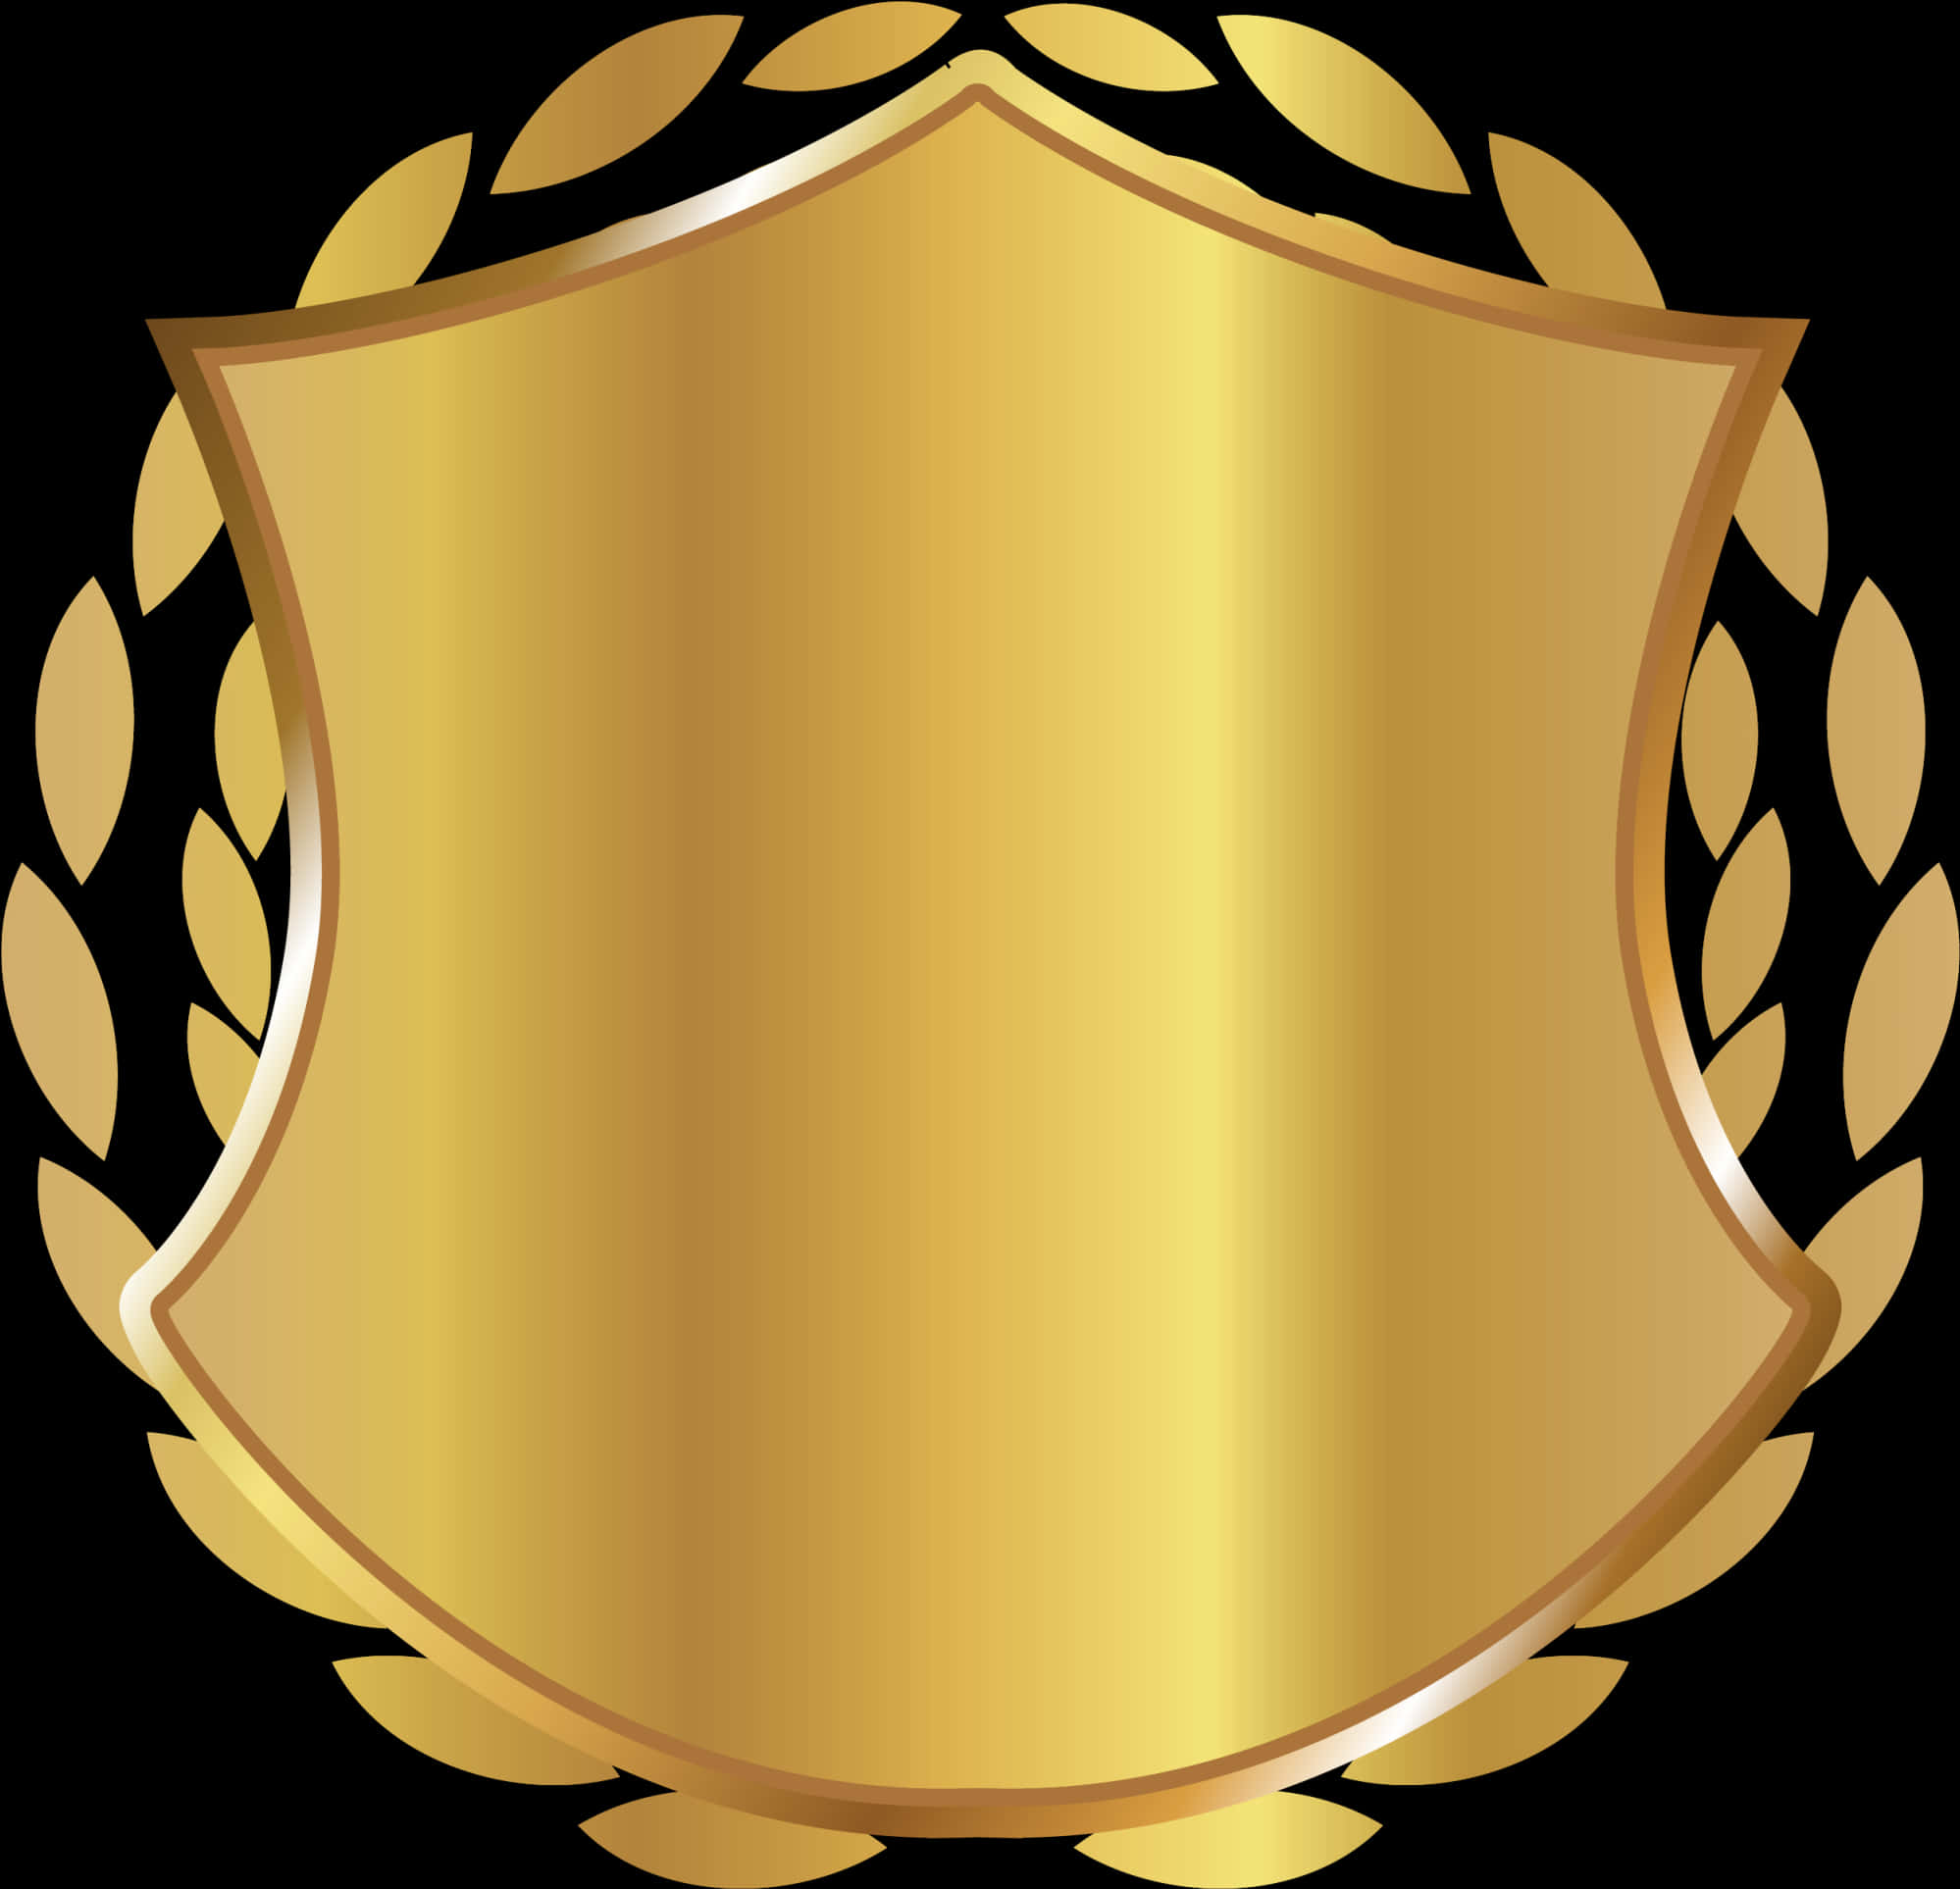 Gold Shield With Wheat